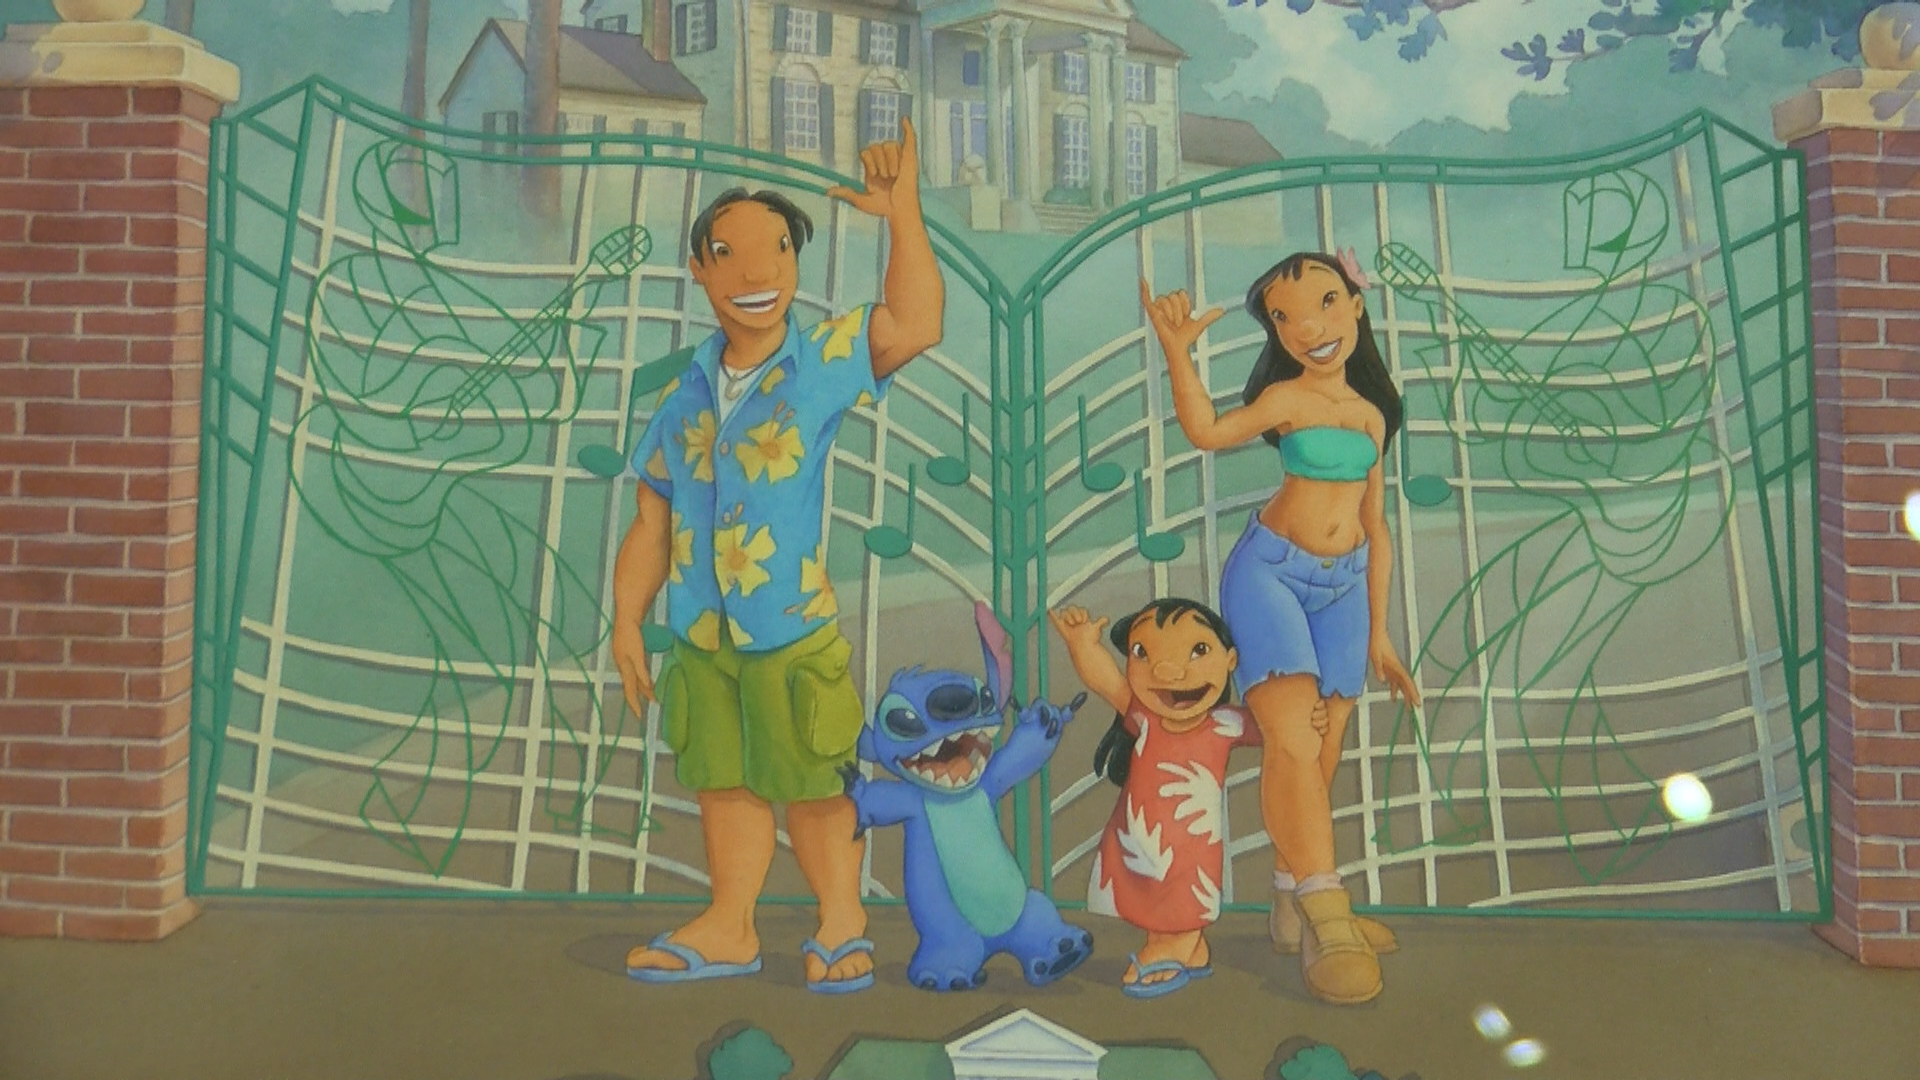 Lilo and Stitch, and Elvis: Graceland's Ties to Disney — The